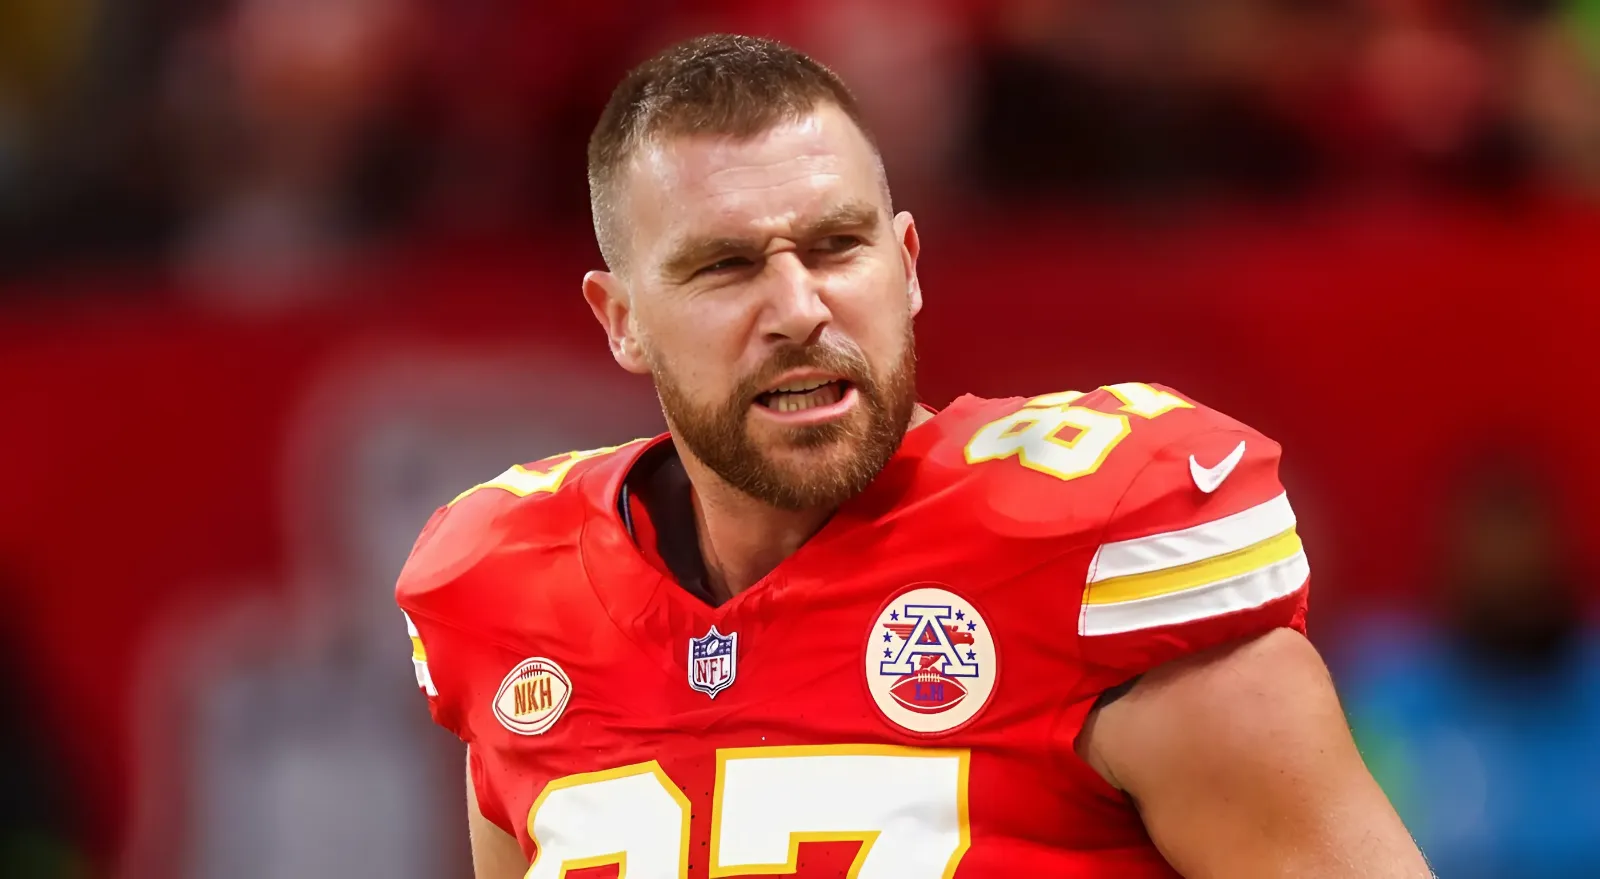 Chiefs Superstar TE Travis Kelce Gives Surprise Update On His Retirement Plans That Suggest He’s Changed His Mind